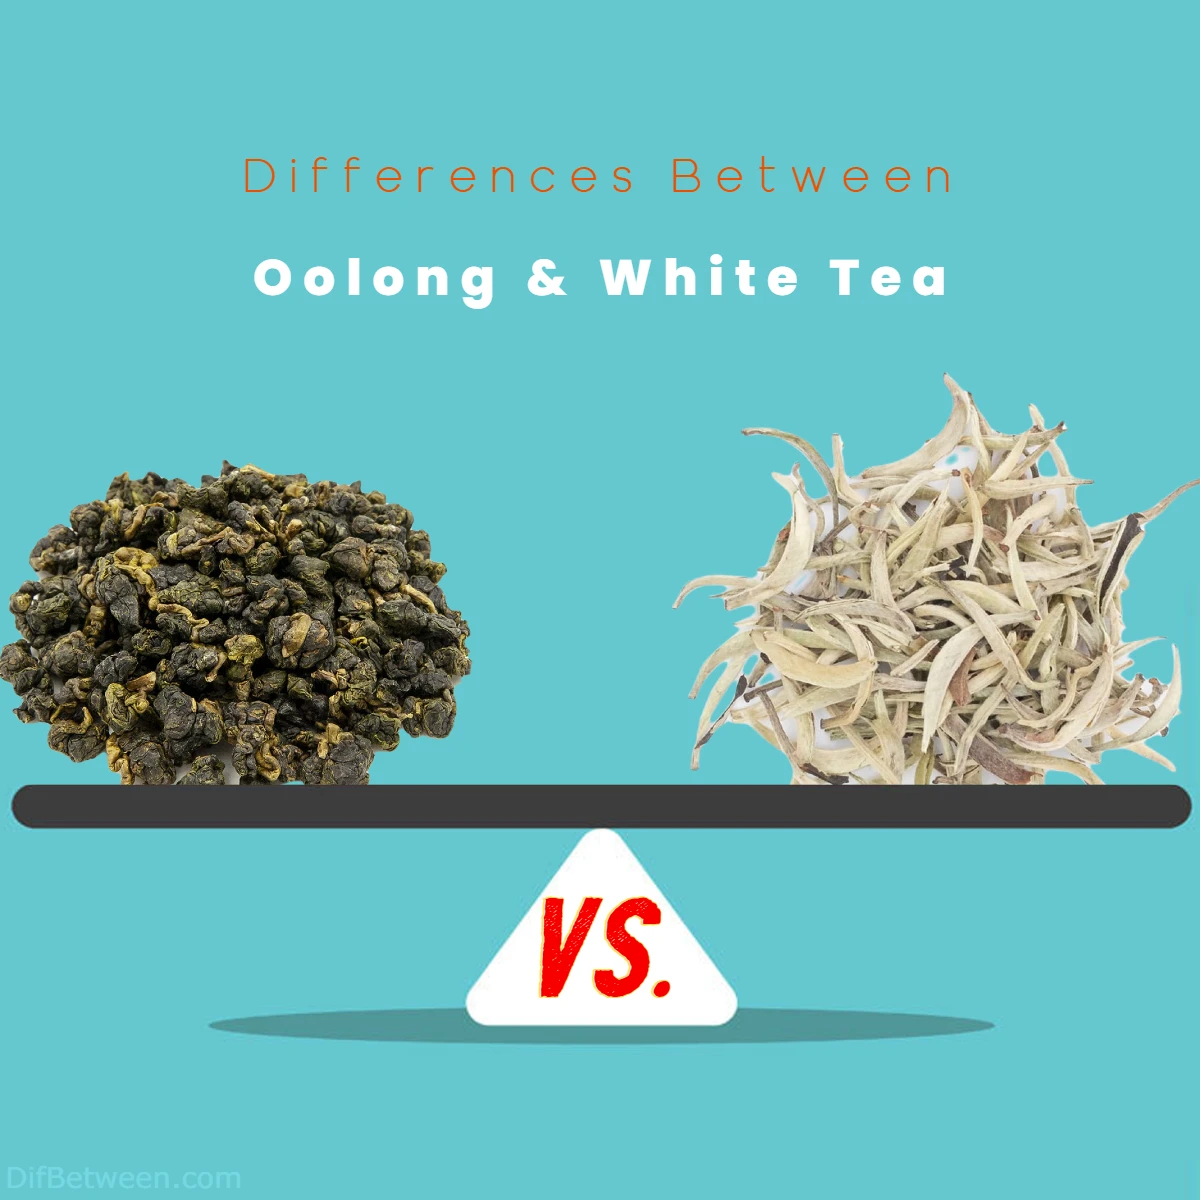 Differences Between White Tea and Oolong Tea